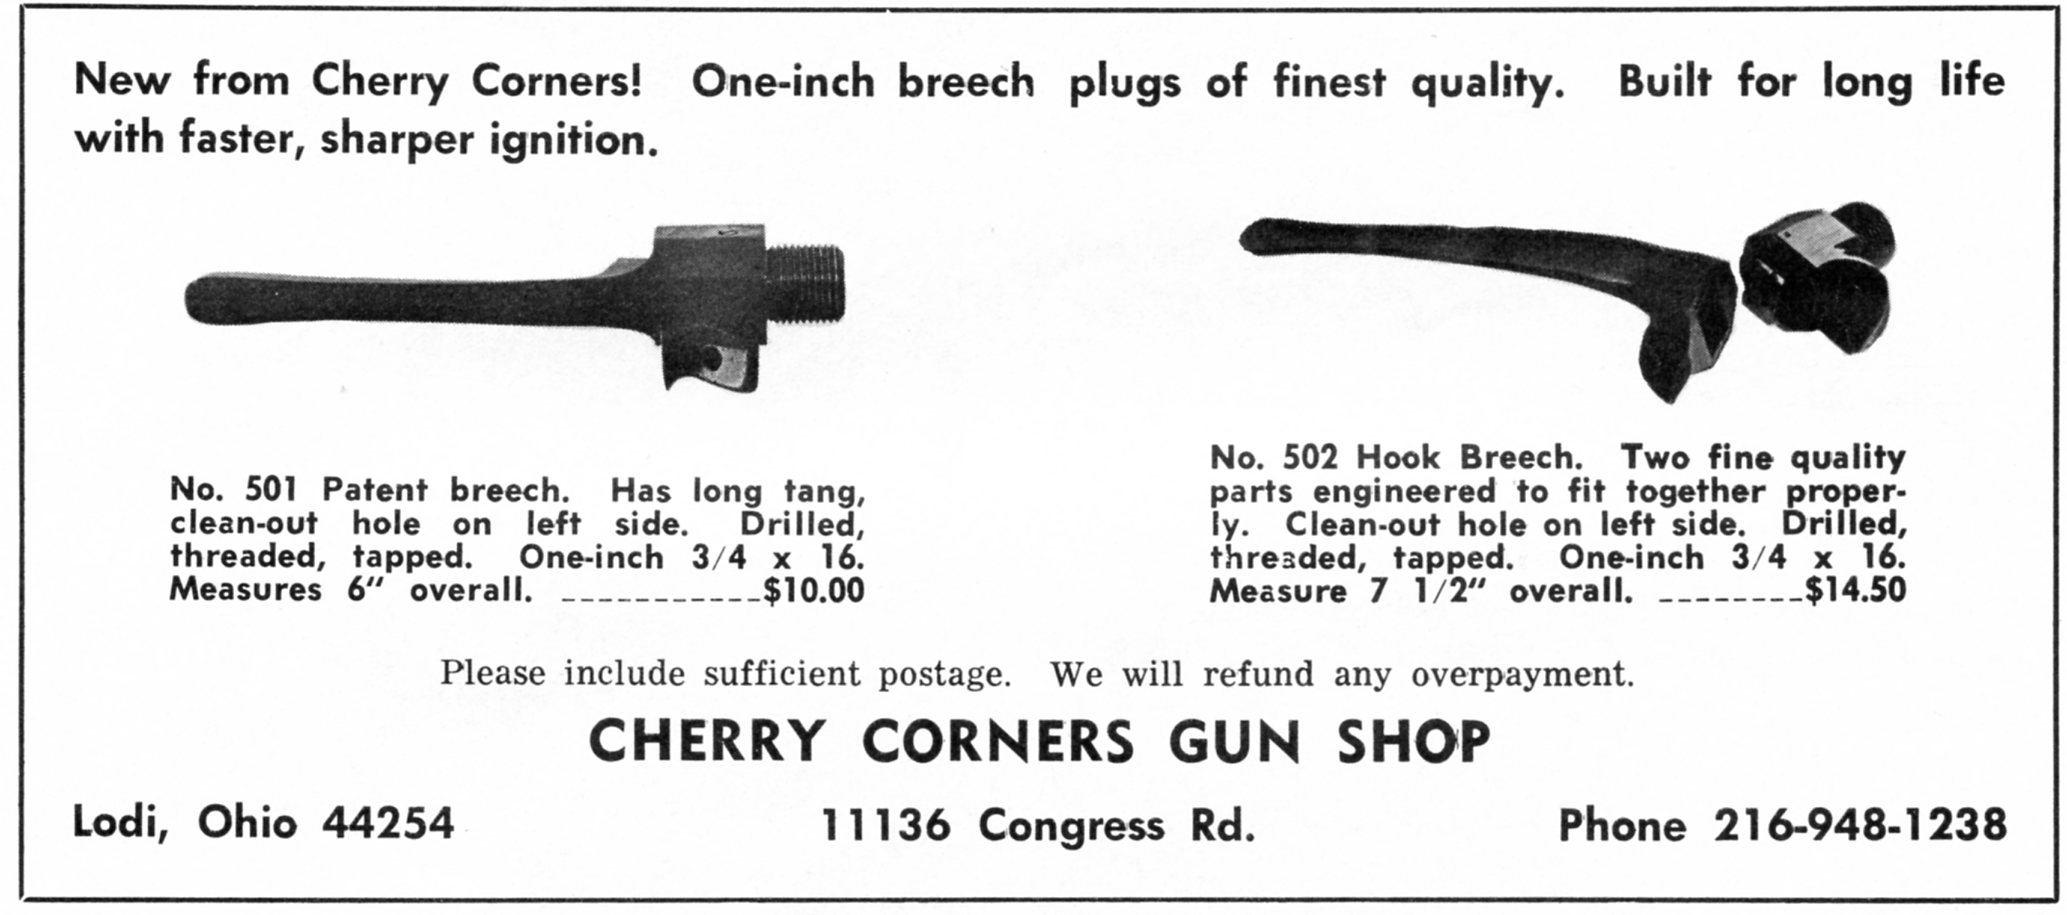 Cherry Coners Right Hand Tang only for 1"Hooked Breech  Muzzleloading